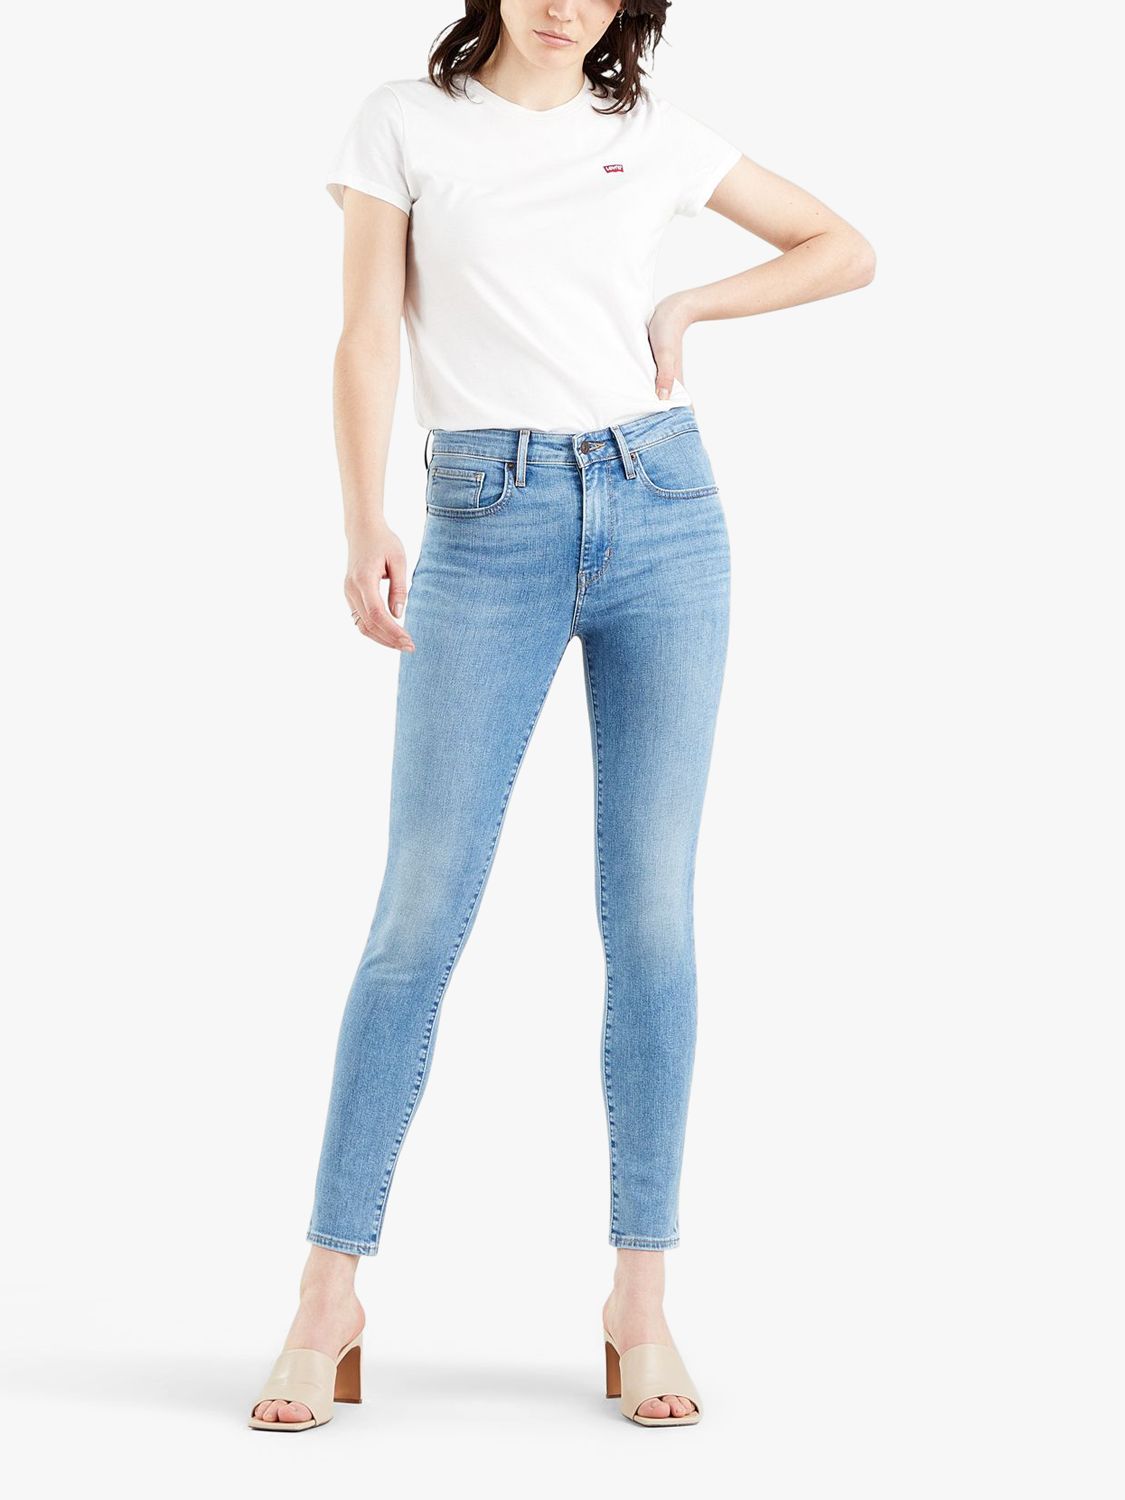 Levi's 721 High Rise Skinny Jeans, Don't Be Extra at John Lewis & Partners